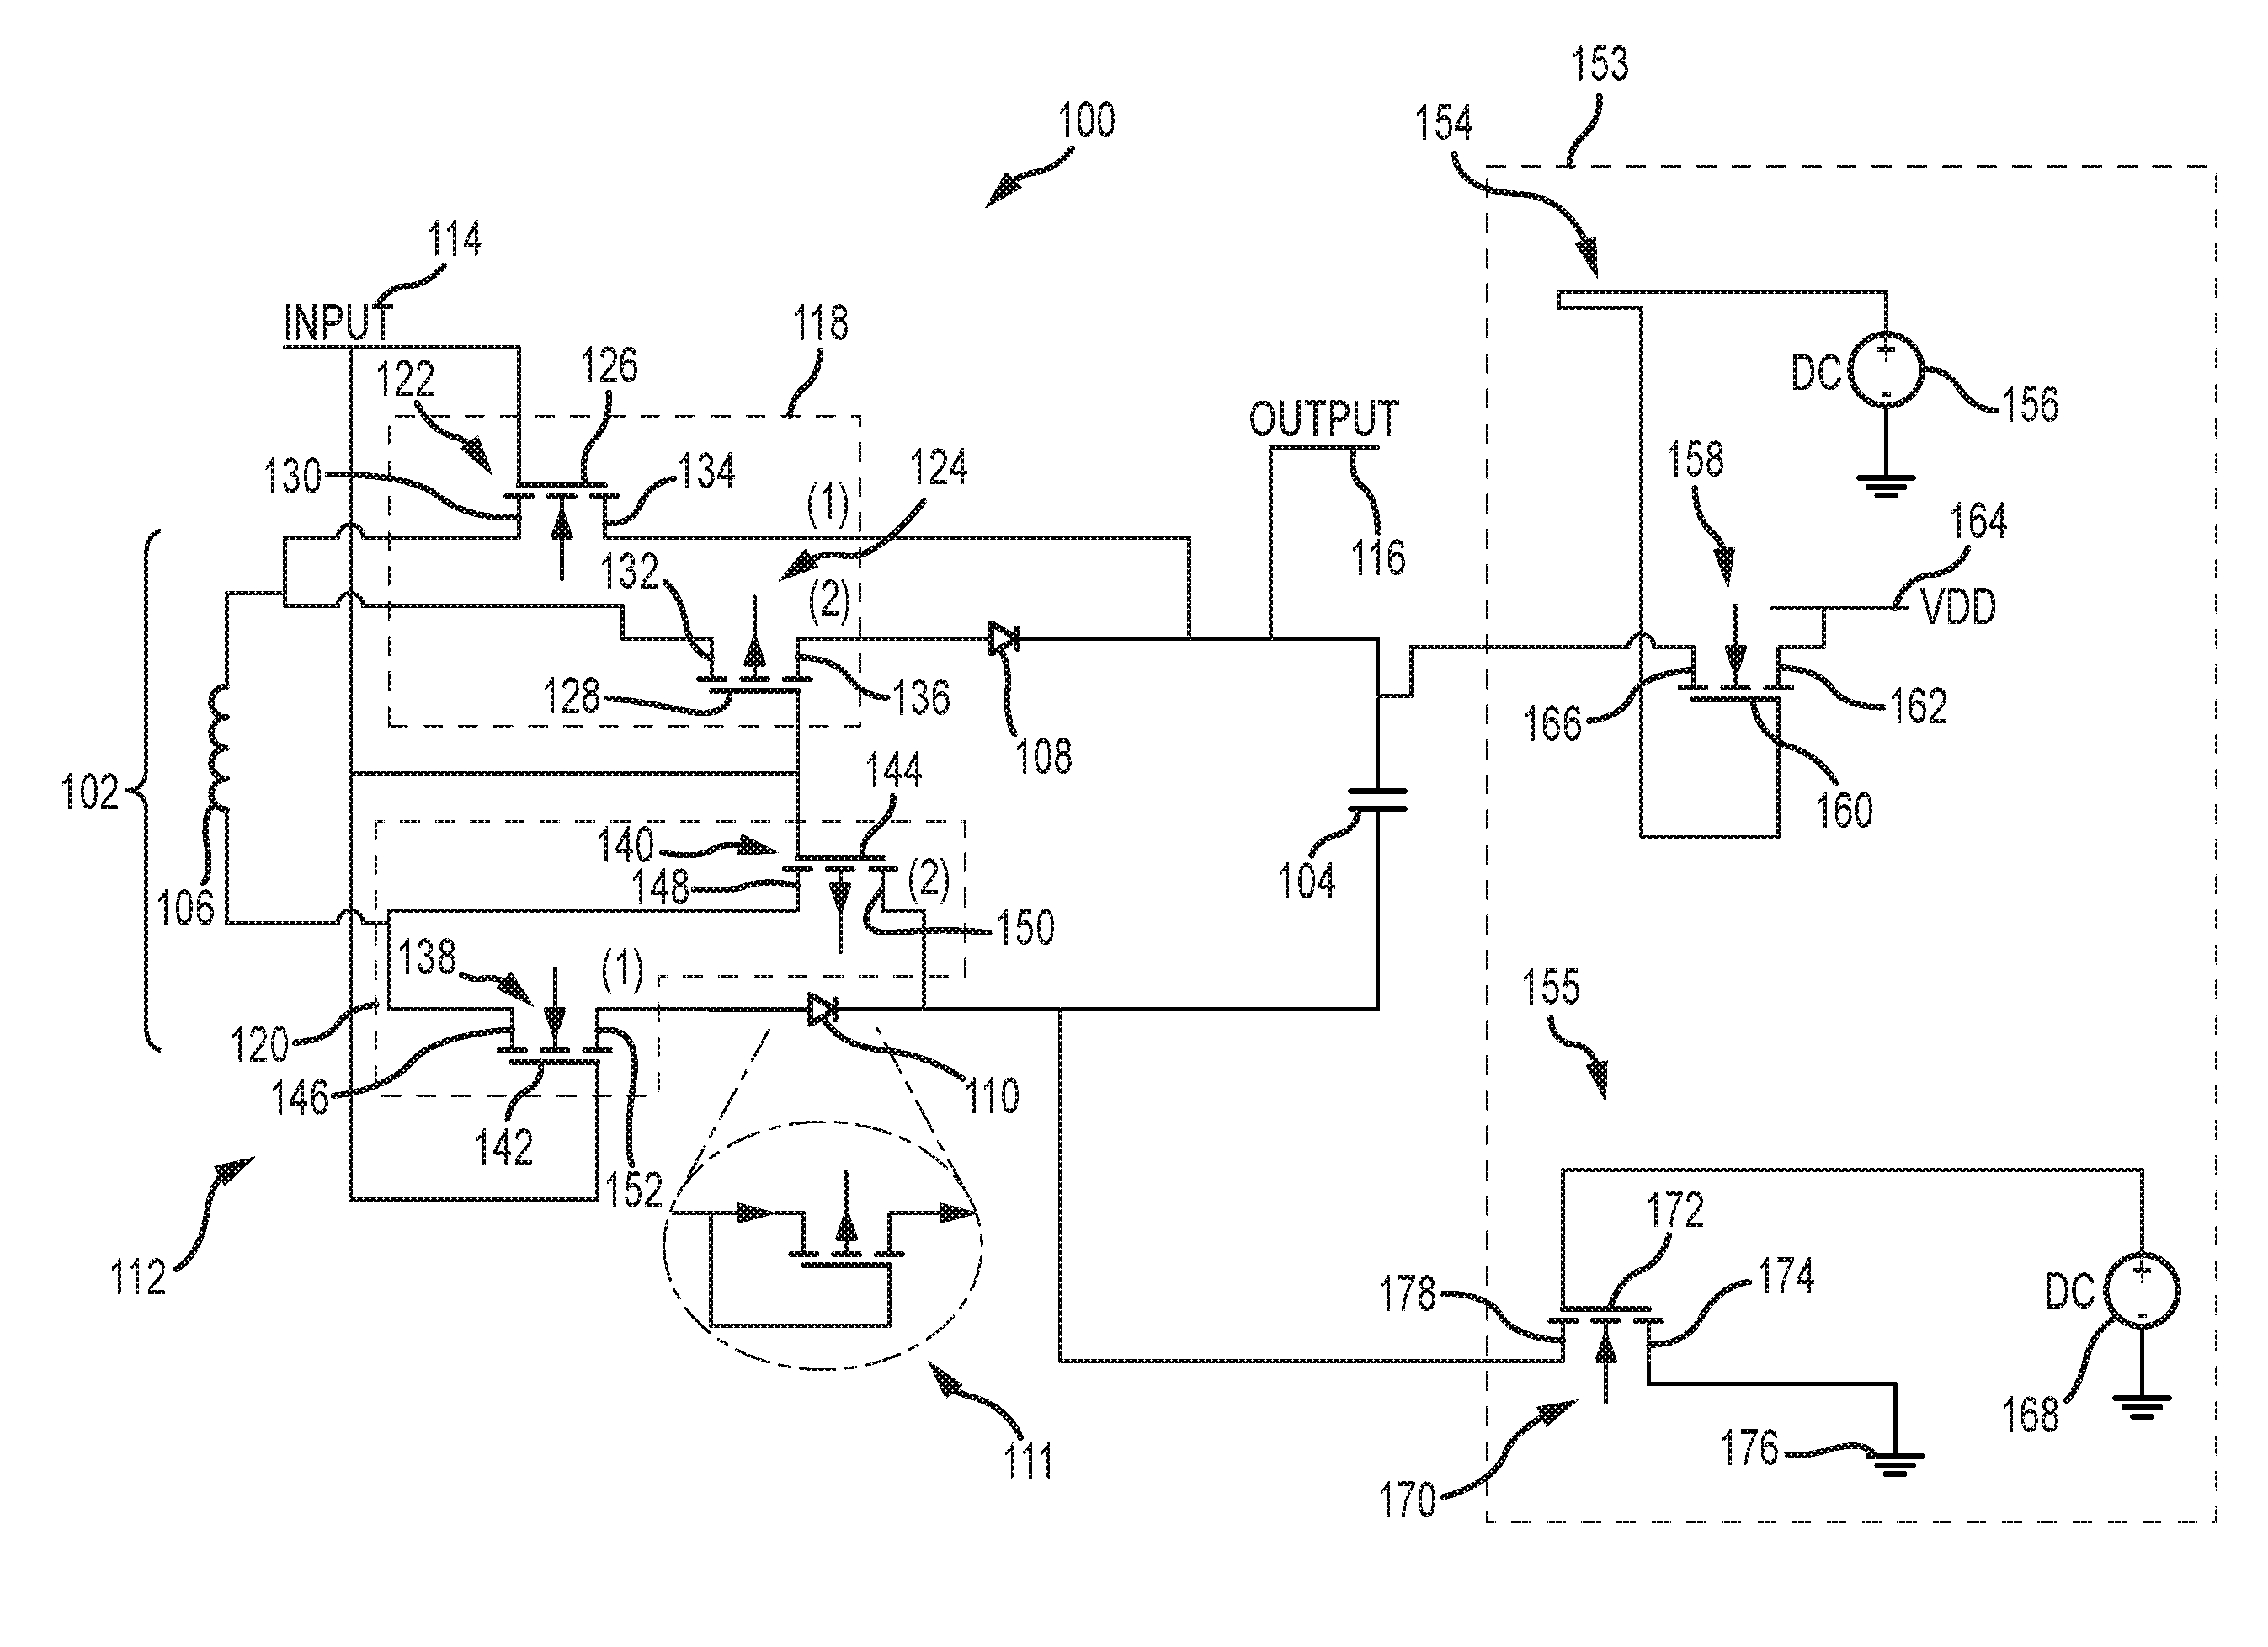 Low-power digital logic using a Boolean logic switched inductor-capacitor (SLC) circuit